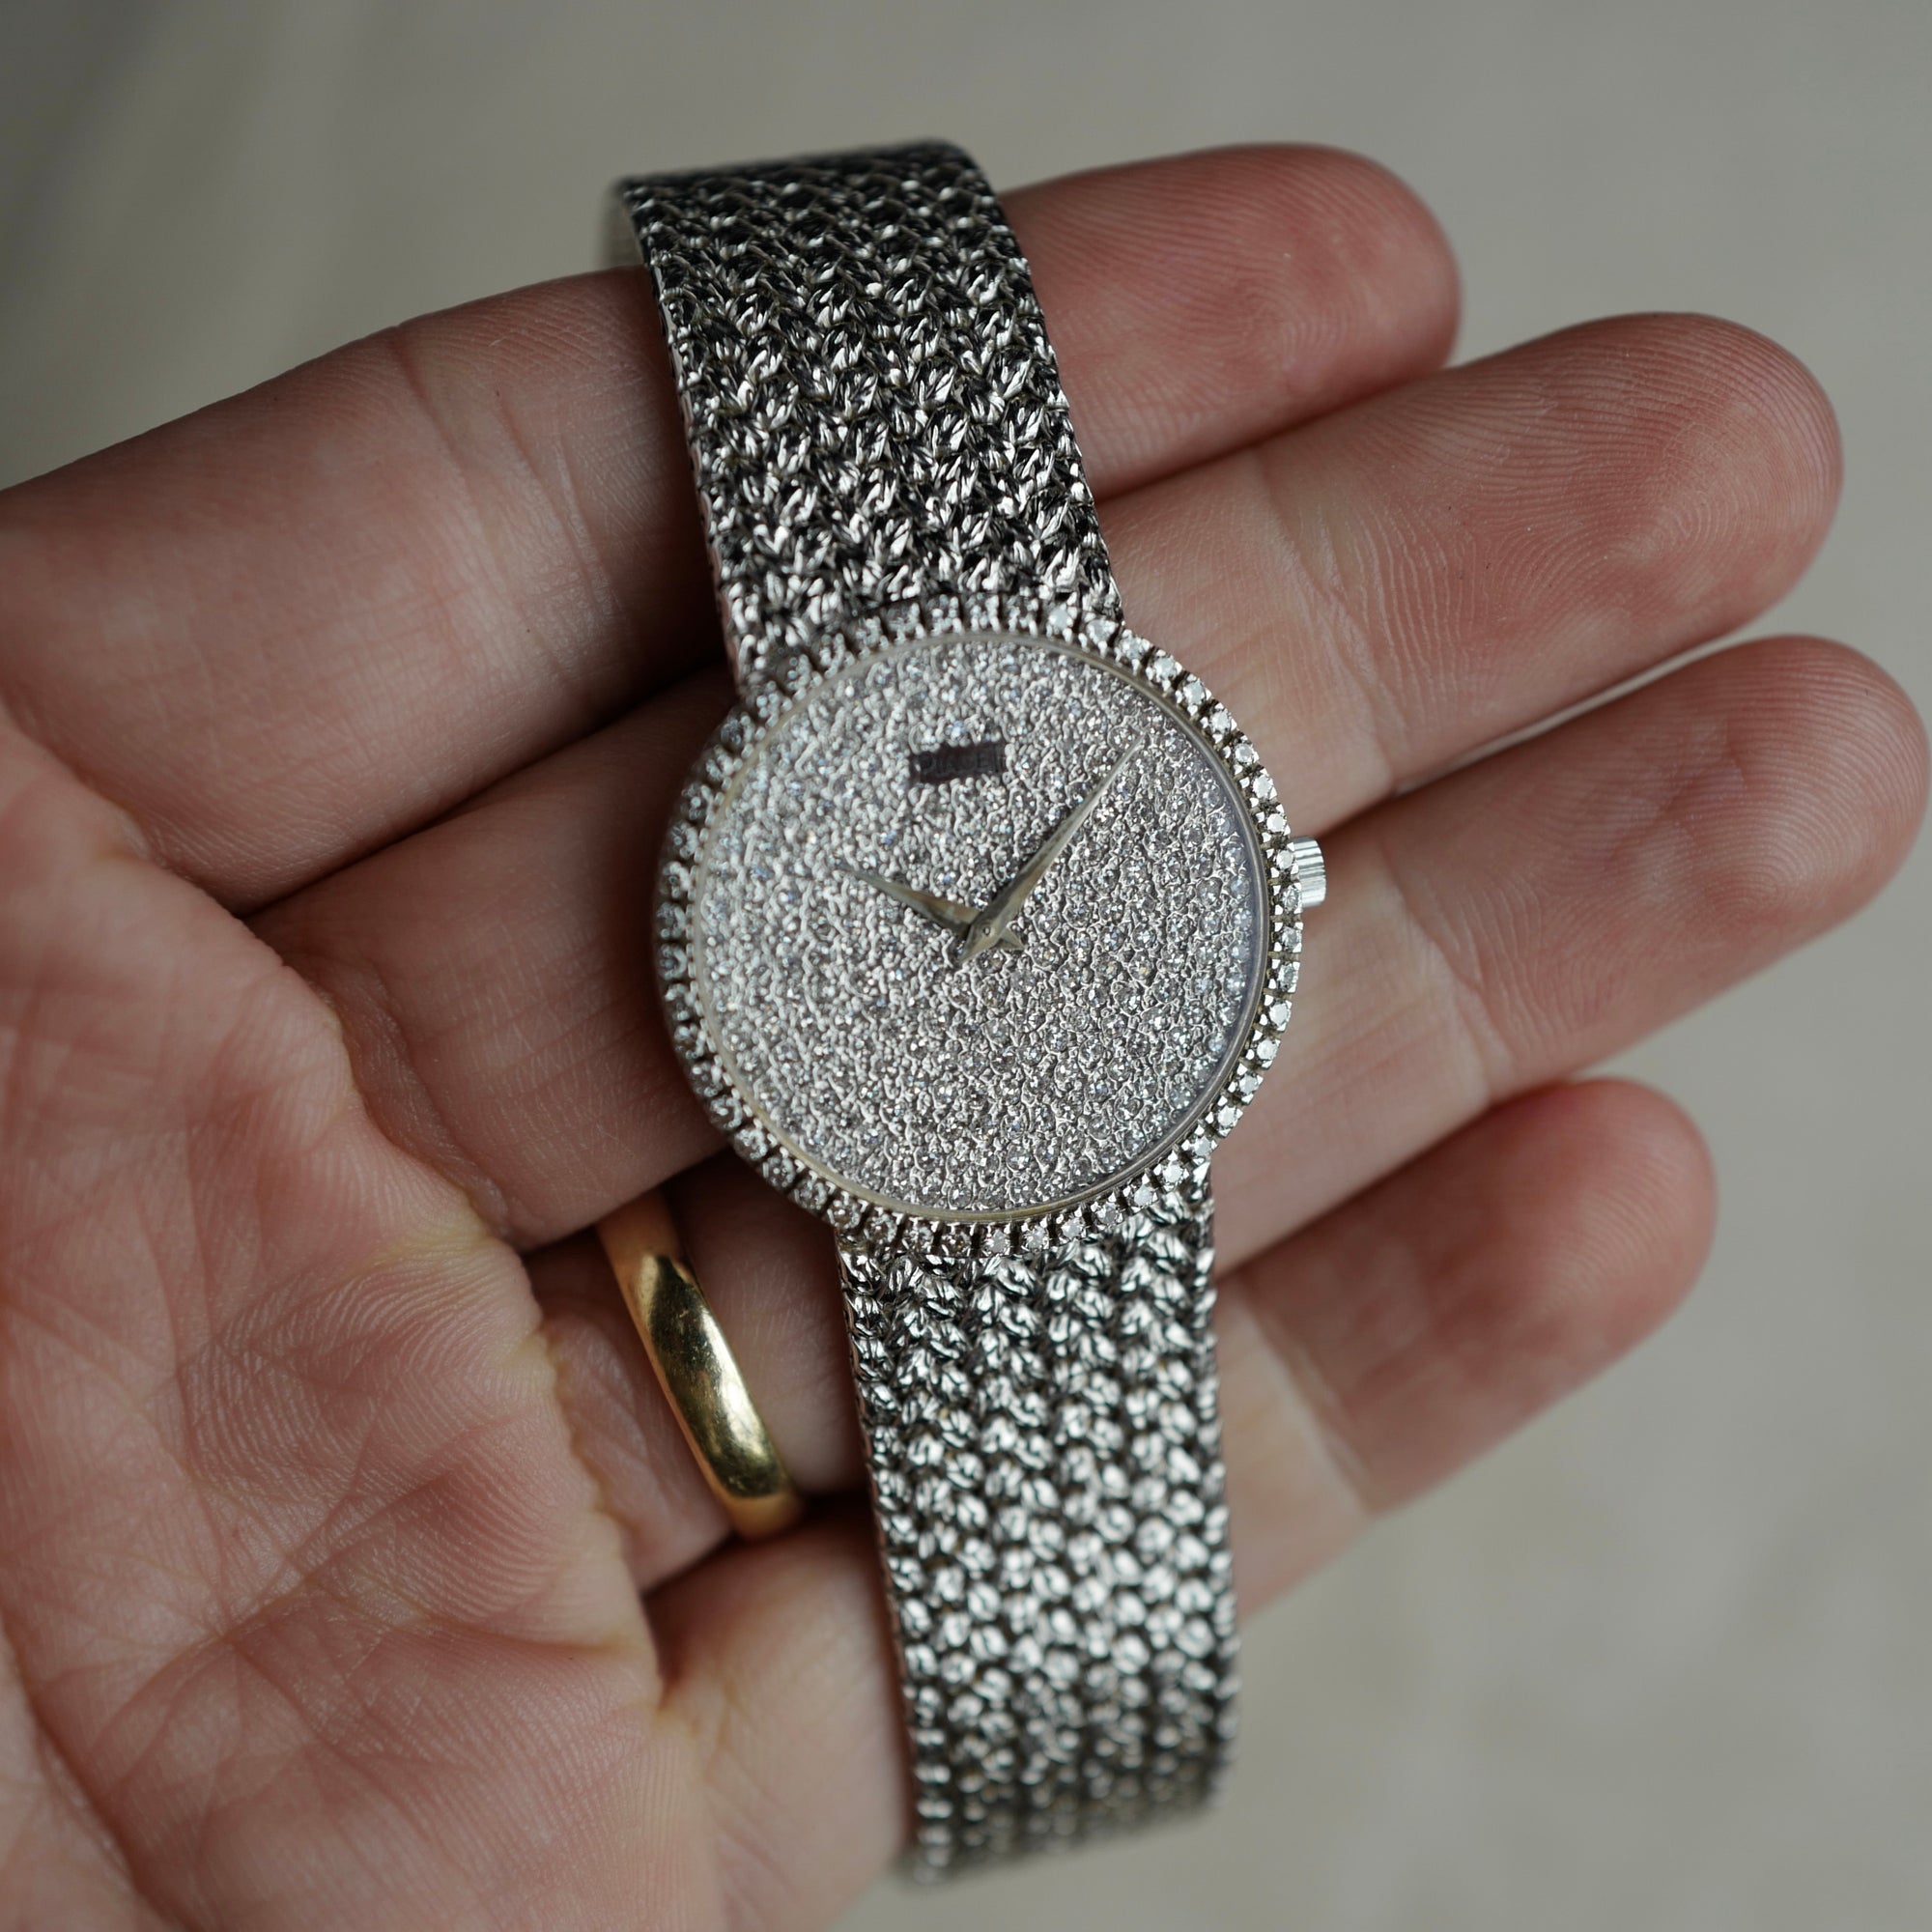 Piaget - Piaget White Gold Bracelet Watch with Diamond Bezel and Dial - The Keystone Watches